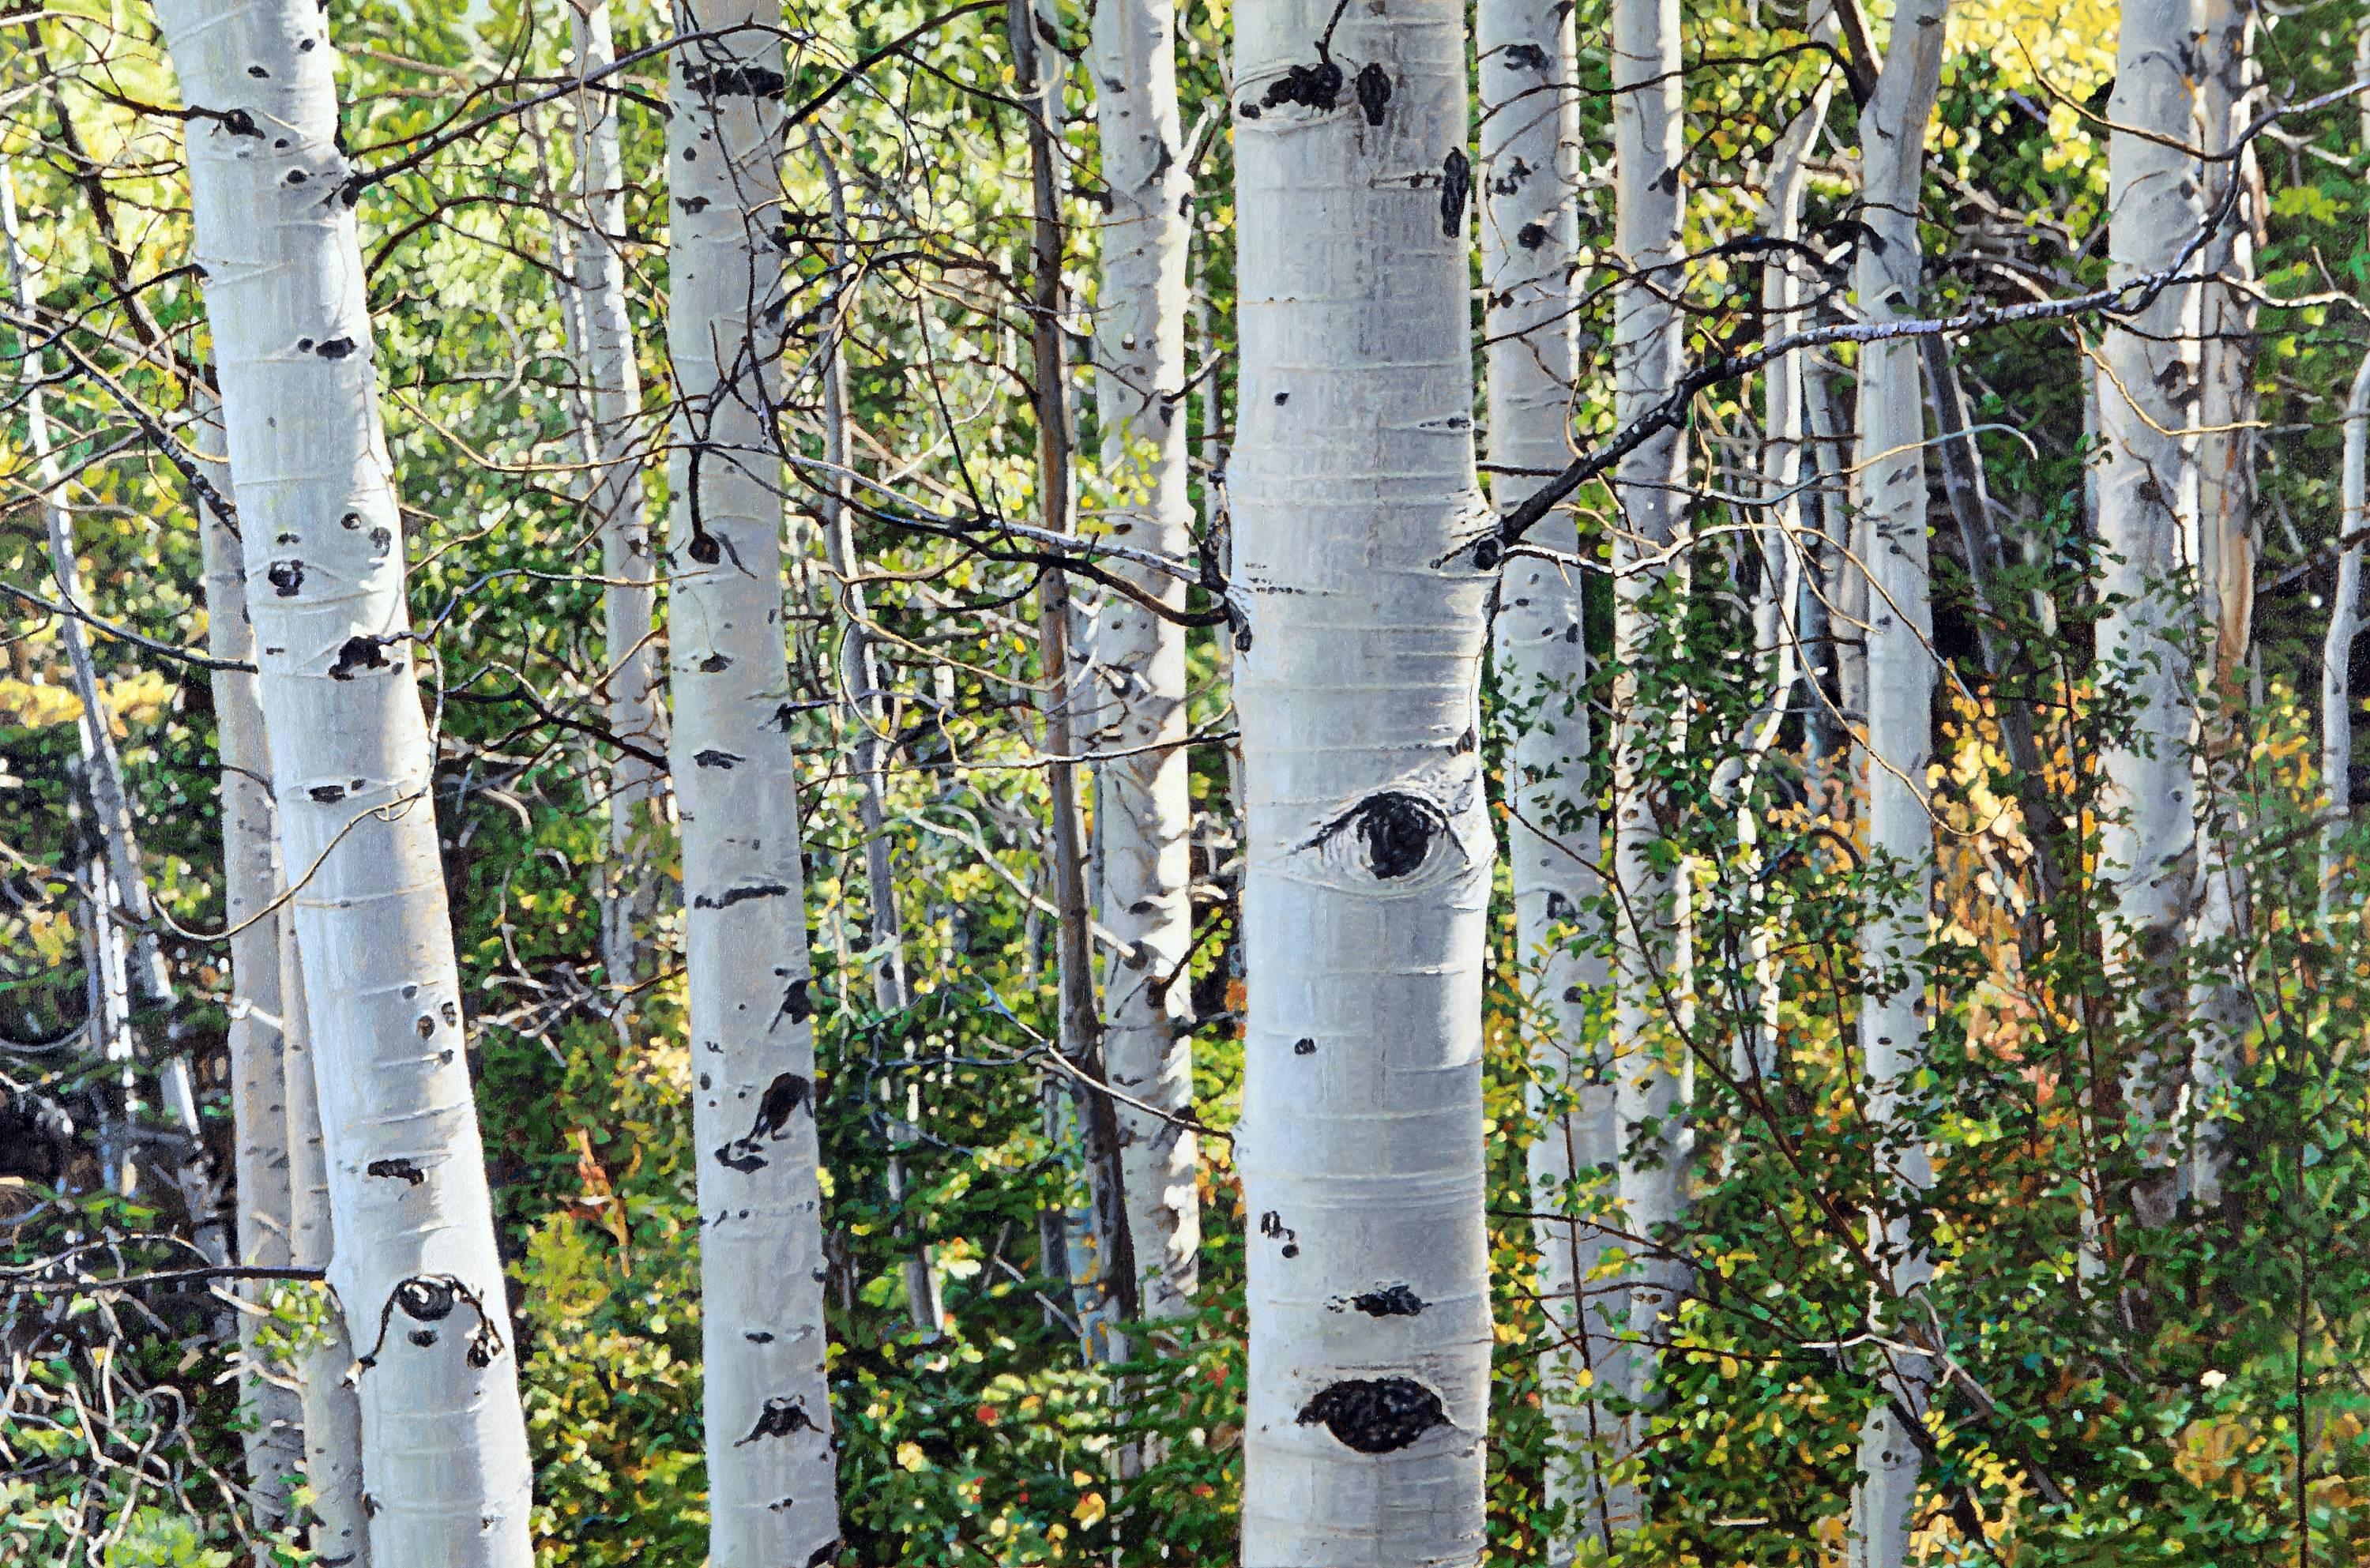 Jeffrey Vaughn Landscape Painting - "Aspen Trees Number", Treescape Oil Painting on Stretched Canvas, Framed